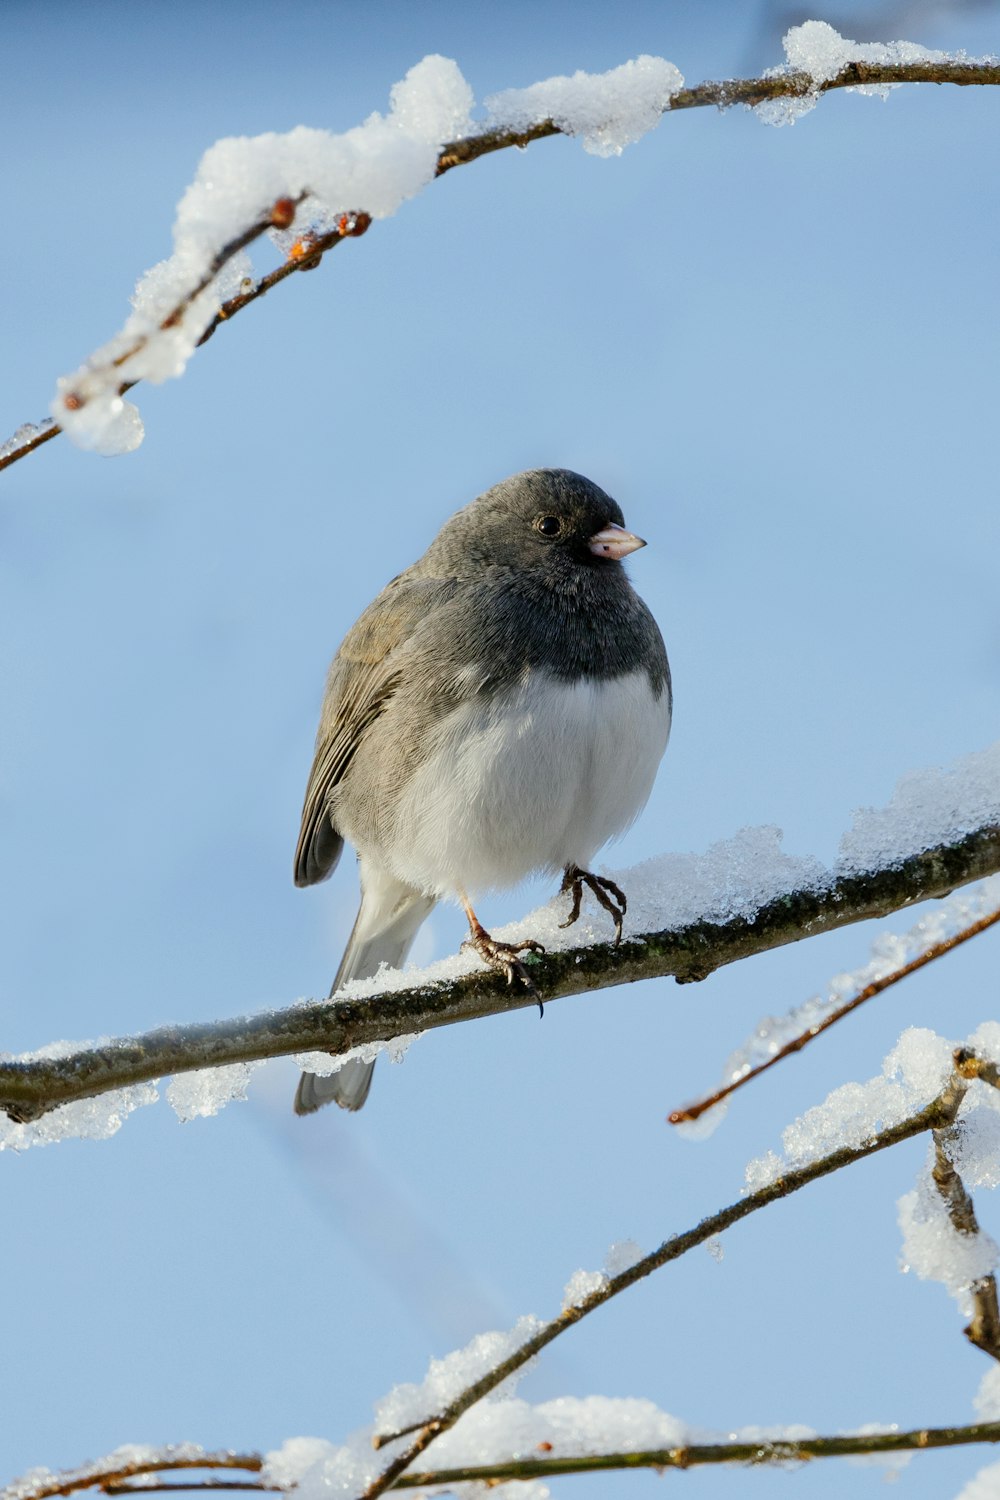 a small bird perched on a tree branch covered in snow